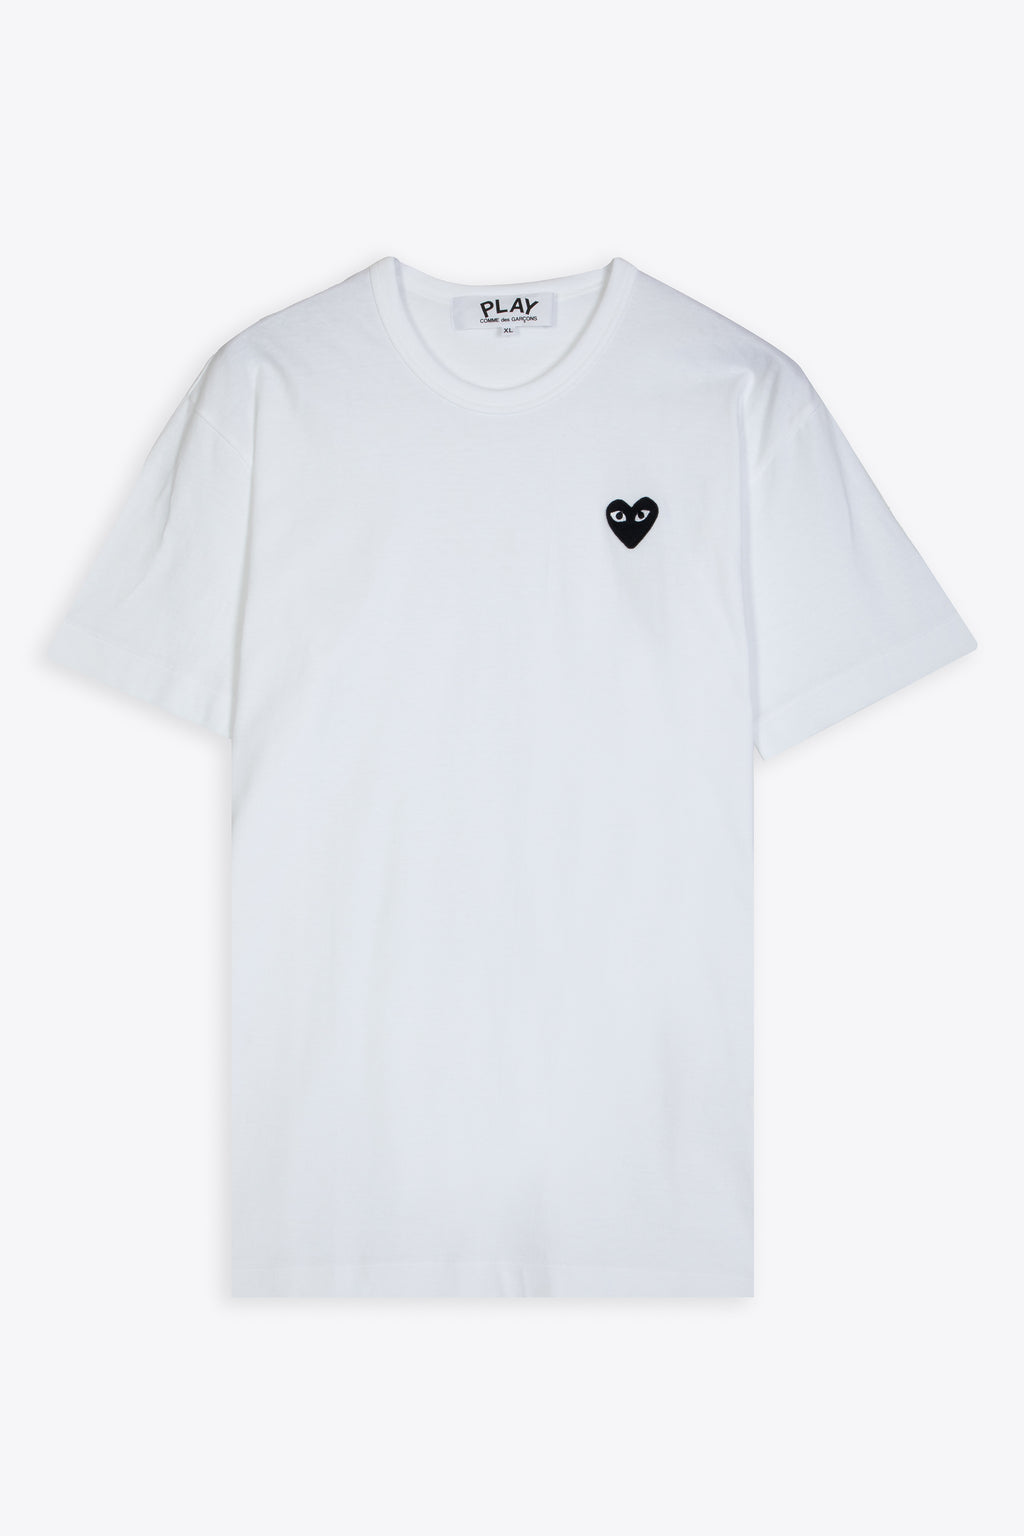 alt-image__White-t-shirt-with-big-heart-patch